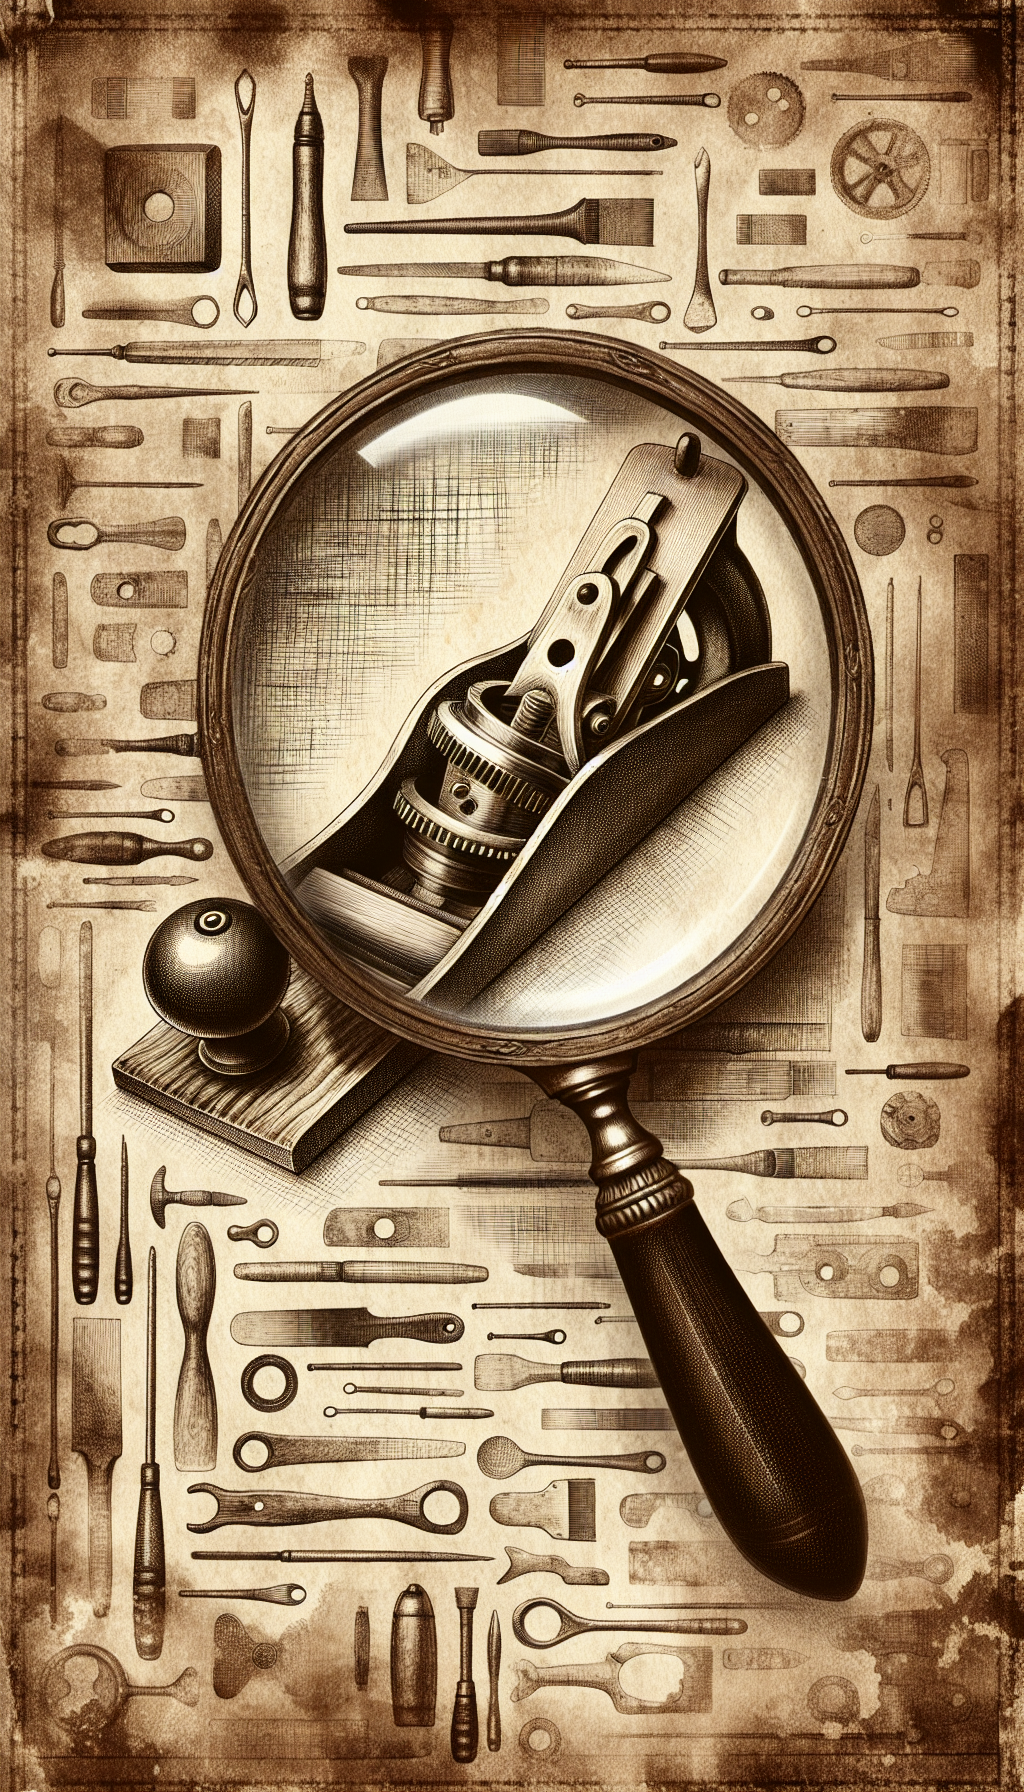 A textured, sepia-toned sketch of a magnifying glass hovered over a vintage woodworking plane, with half revealing the shiny, intricate gears underneath the patina, and the other half displaying the time-worn, rusty exterior. Subtle outlines of various antique tools fade into the aged paper background, symbolizing the quest to identify relics of craftsmanship through the marks of time.